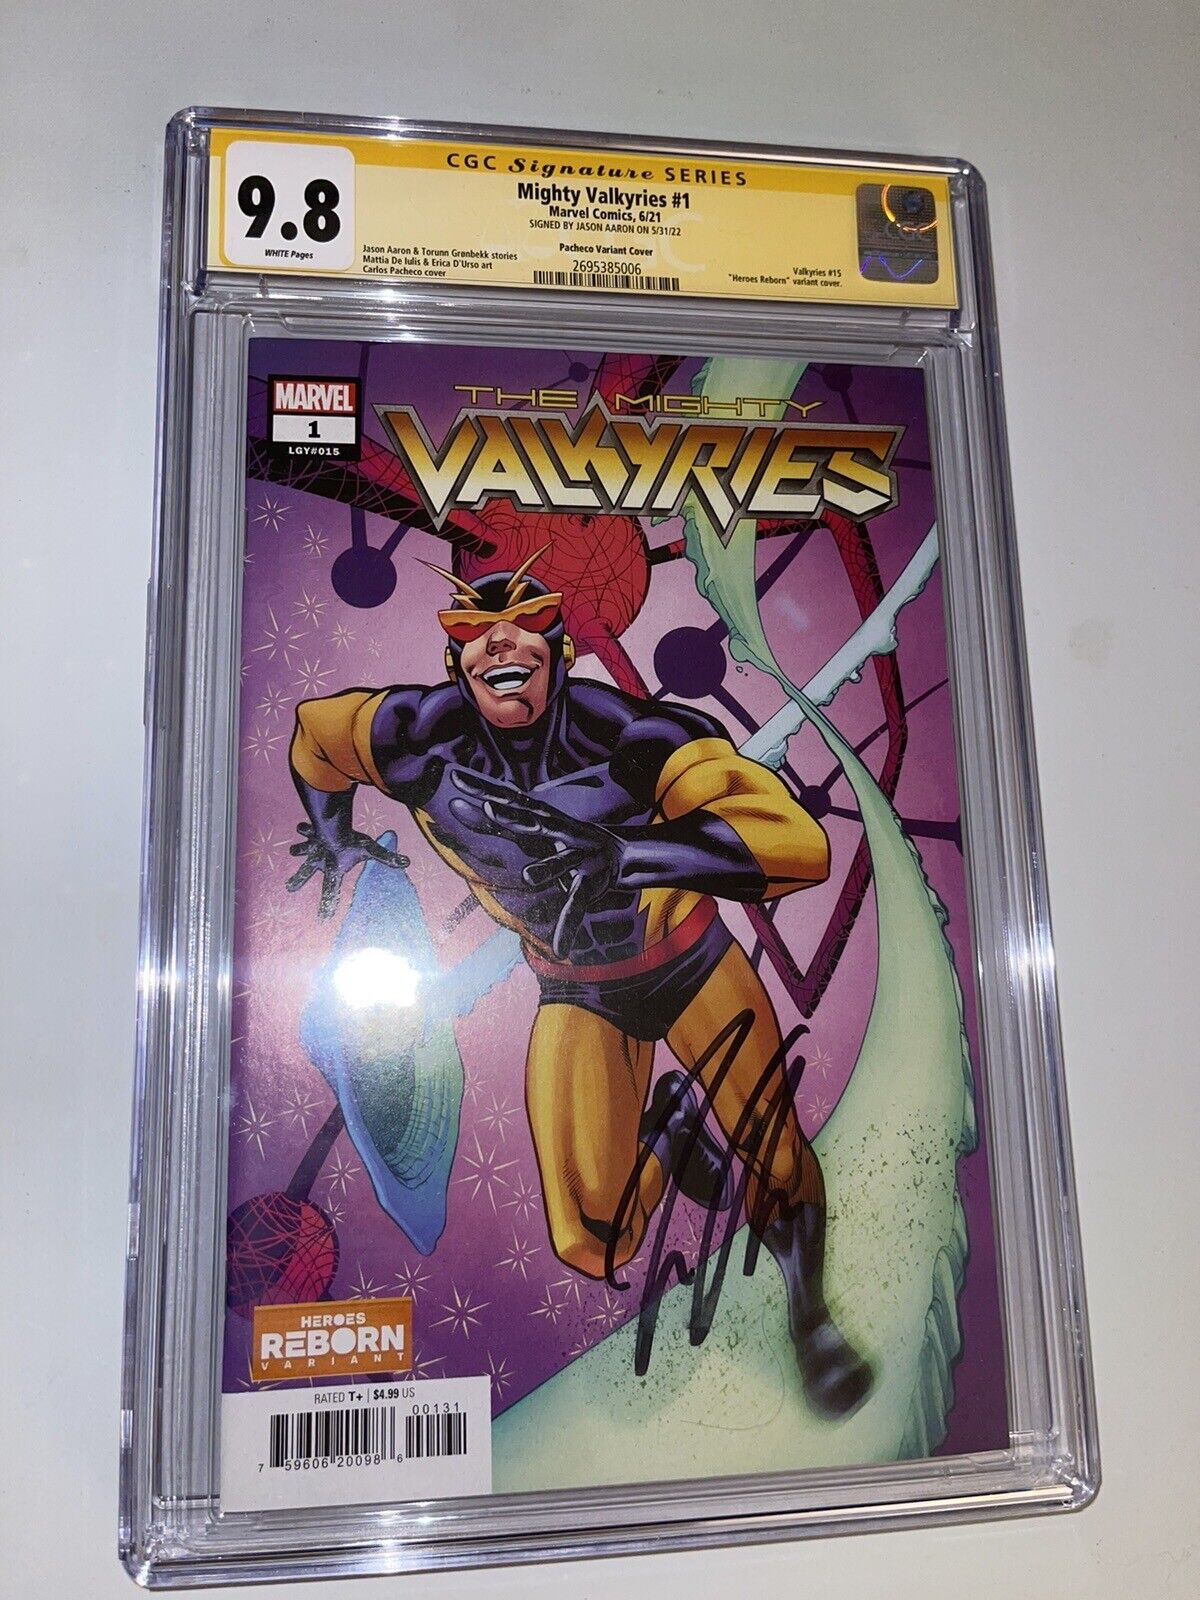 MIGHTY VALKRIES #1 CGC SS 9.8 Signed by JASON AARON PACHECO VARIANT COVER 2021